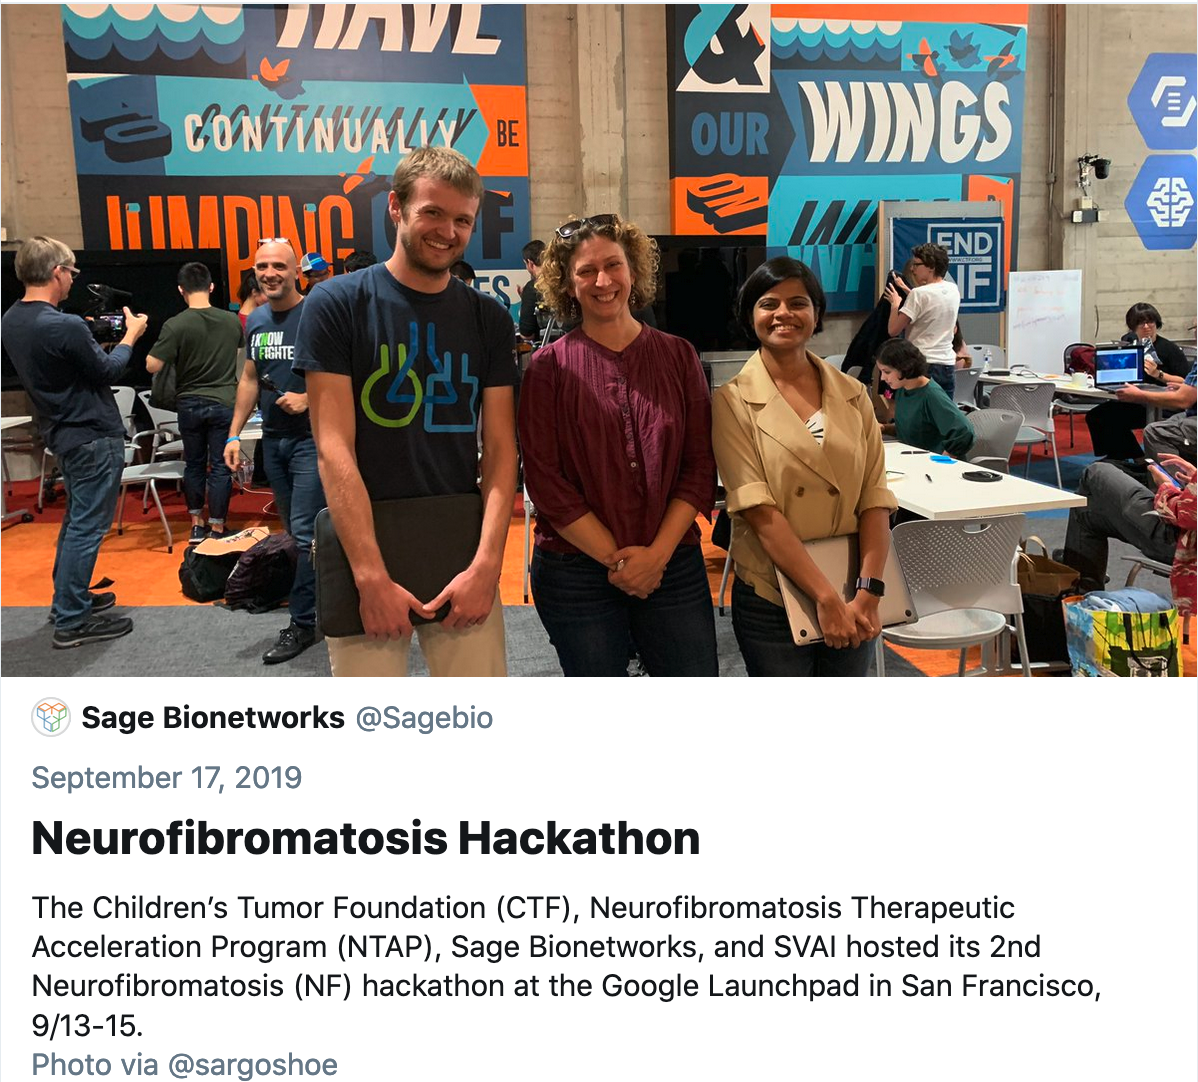 Screenshot of a group of people at a hackathon. There are colorful posters in the background.